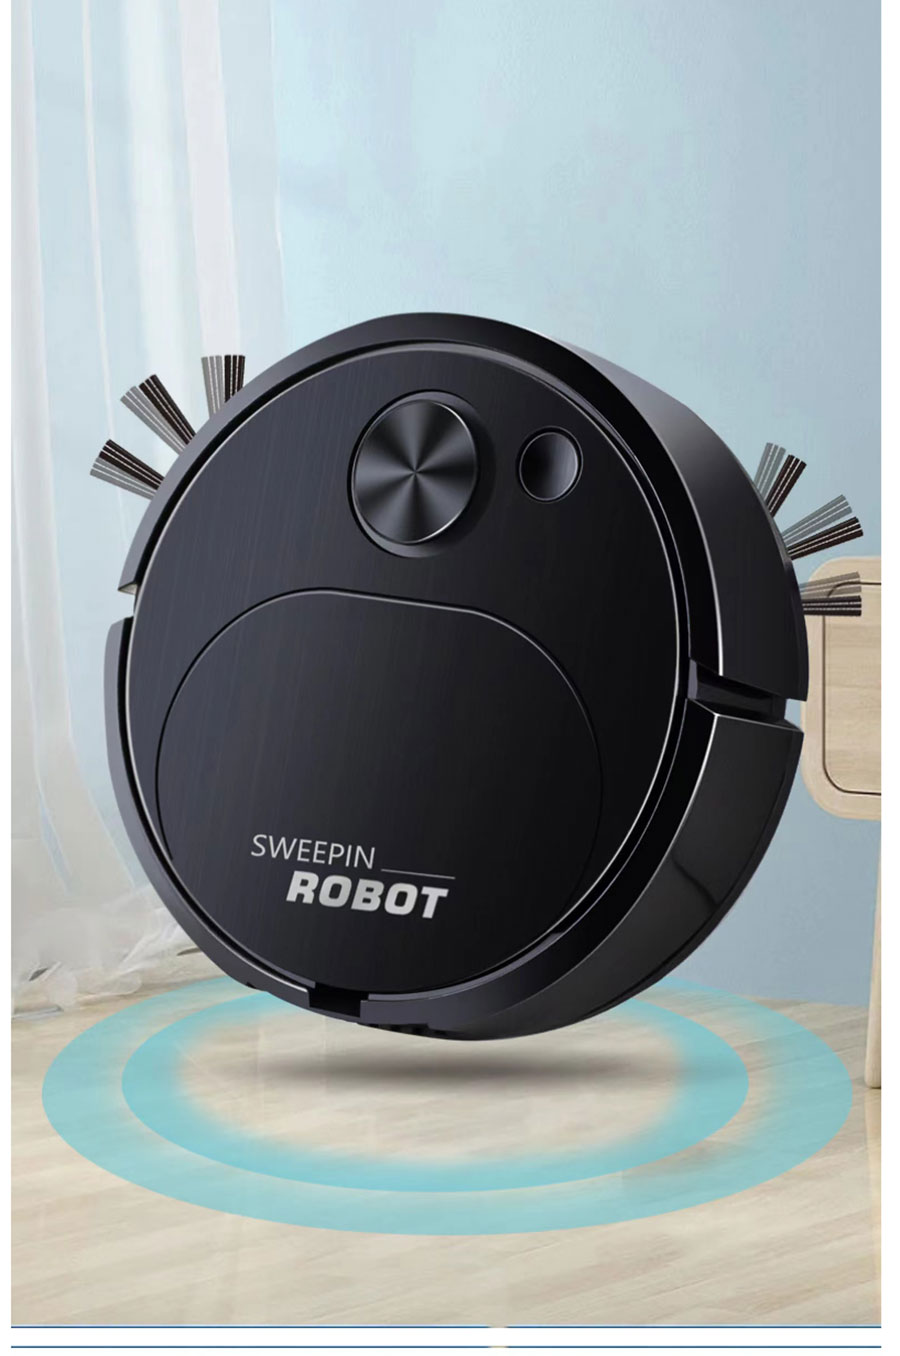 2023 USB Sweeping Robot Vacuum Cleaner Mopping 3 In 1 Smart Wireless 1500Pa Dragging Cleaning Sweep Floor for Home Office